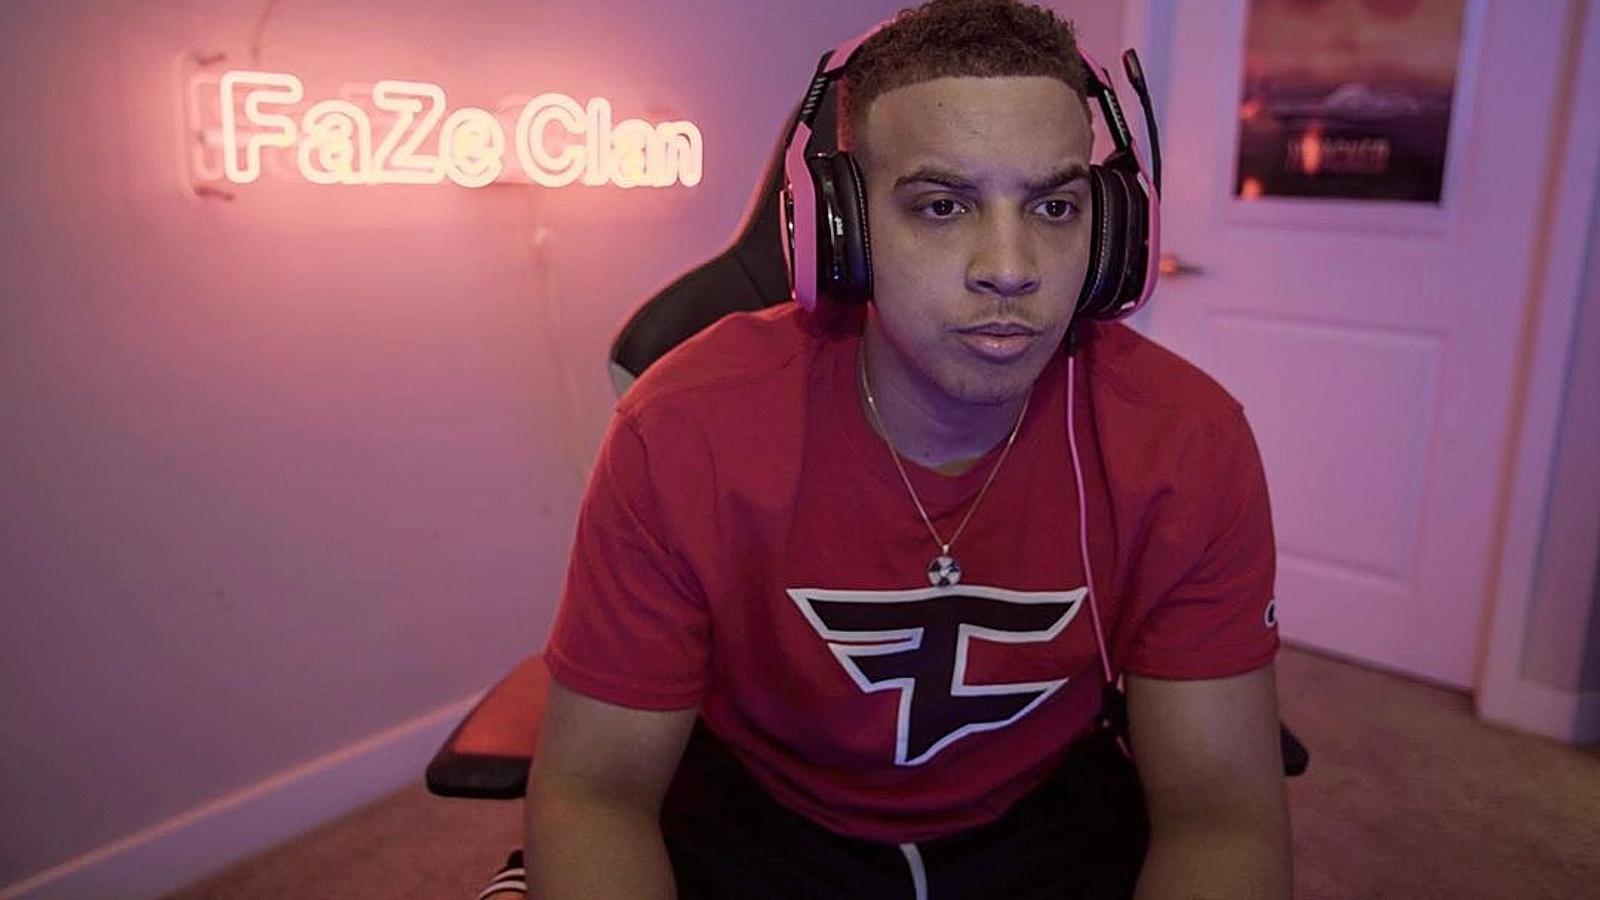 FaZe Swagg, one of the world's most popular Call of Duty players, playing Modern Warfare.